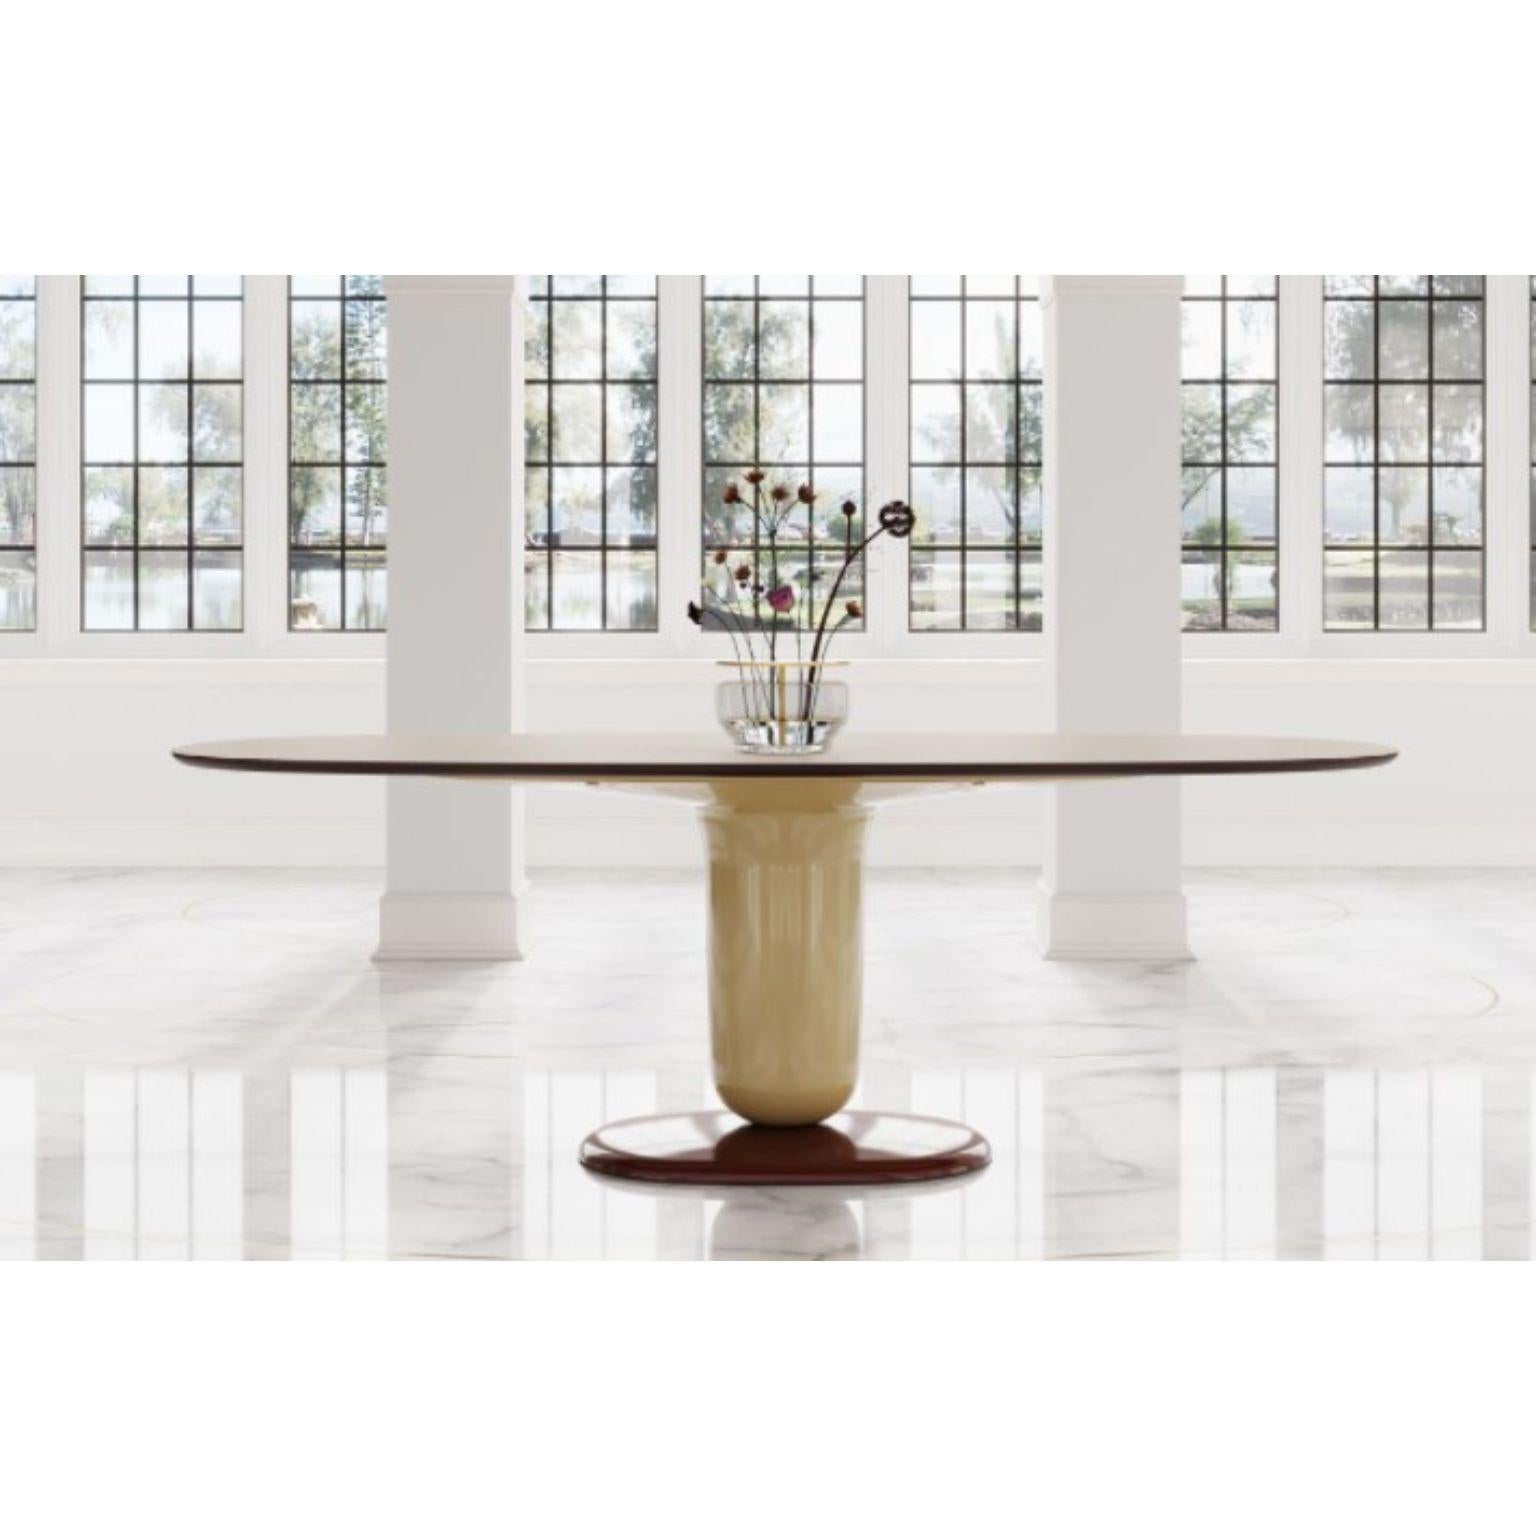 Set of Explorer 5B Dining Table and Showtime Nude Chairs by Jaime Hayon For Sale 1